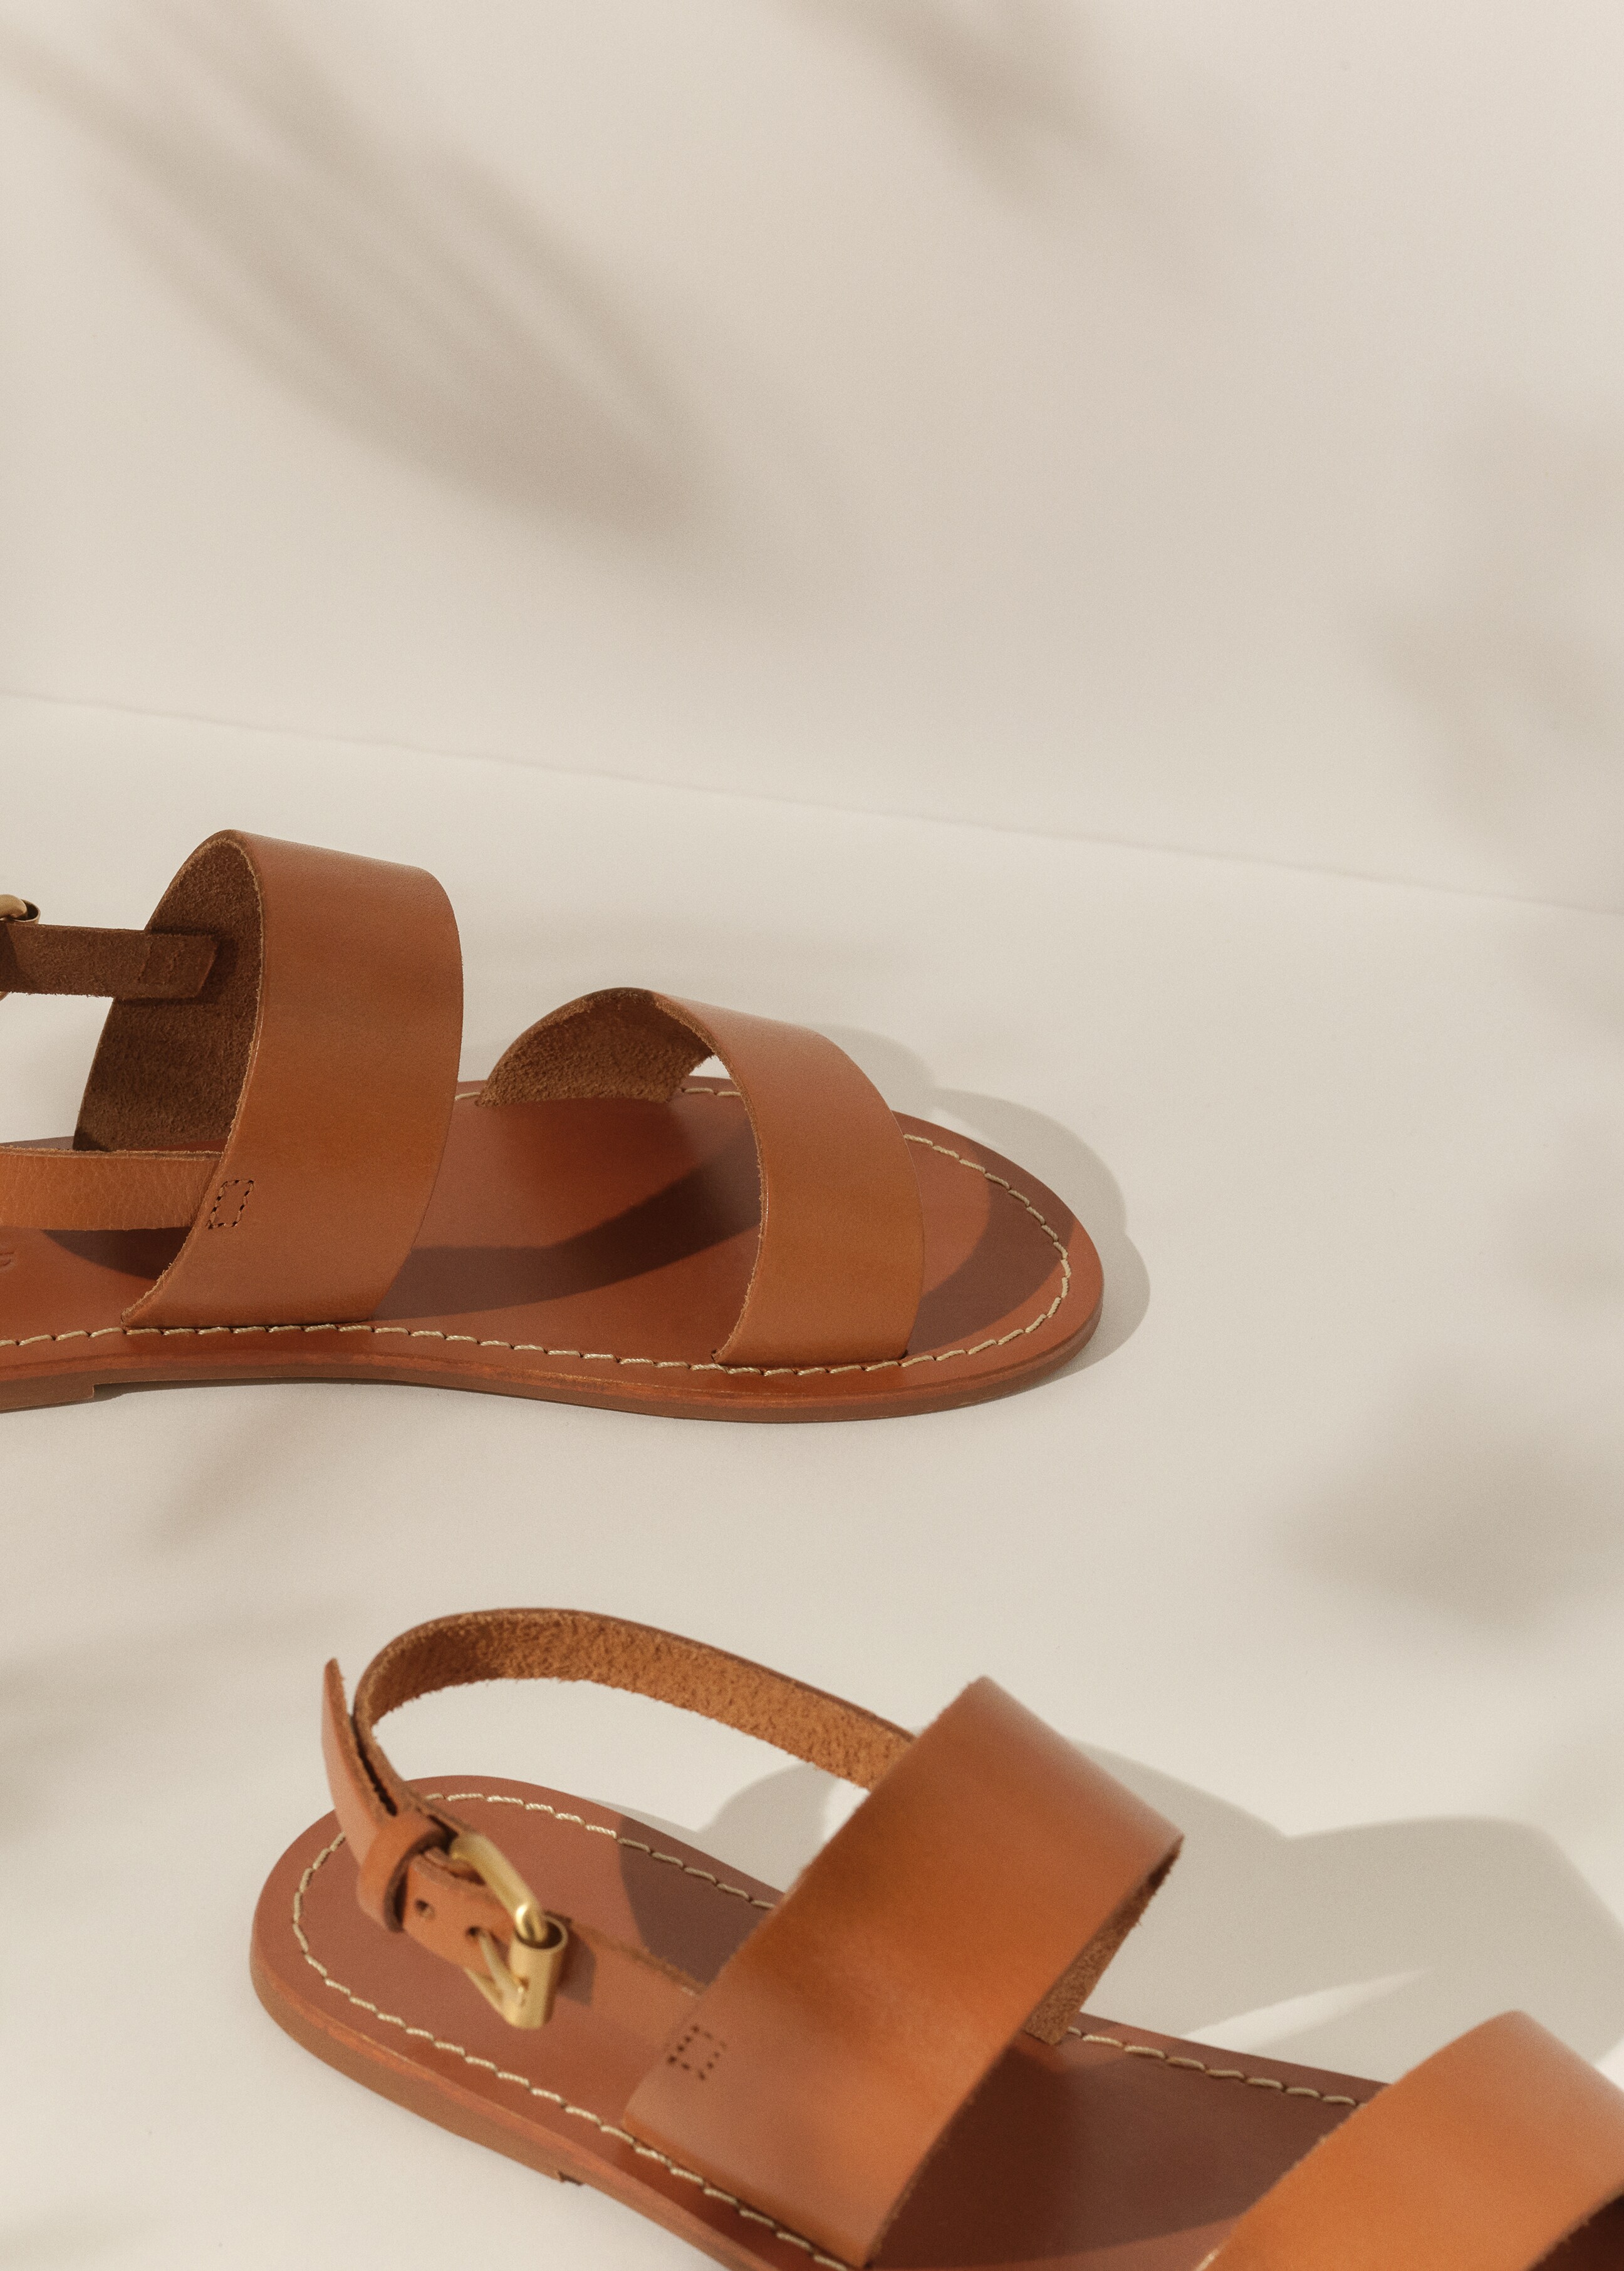 Leather sandals with straps - General plane